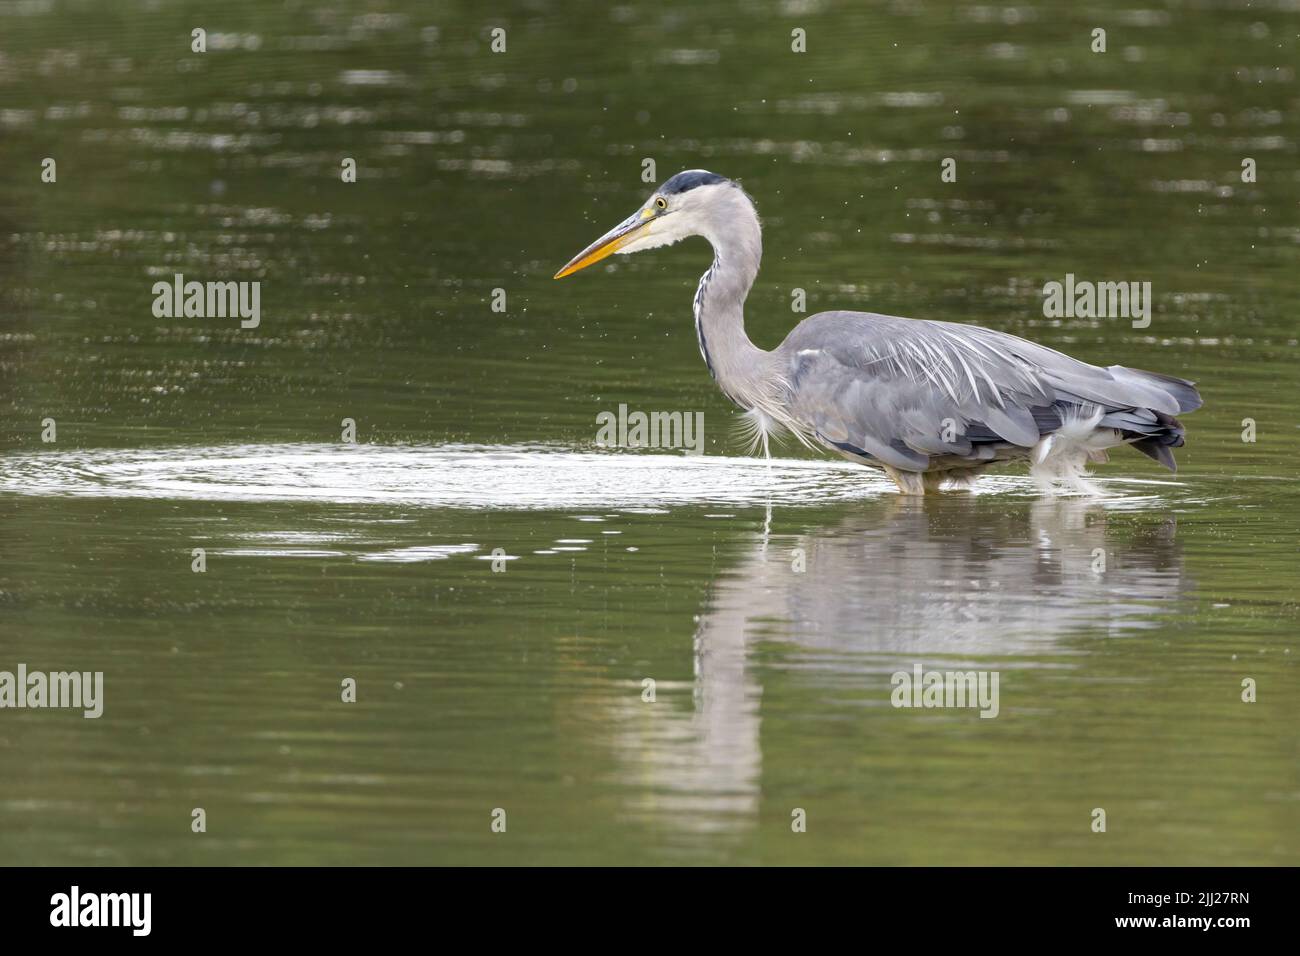 Grey heron Ardea cinerea Long neck and legs long dagger like bill blue grey back and wings whitish head neck underparts black streaks neck and breast Stock Photo